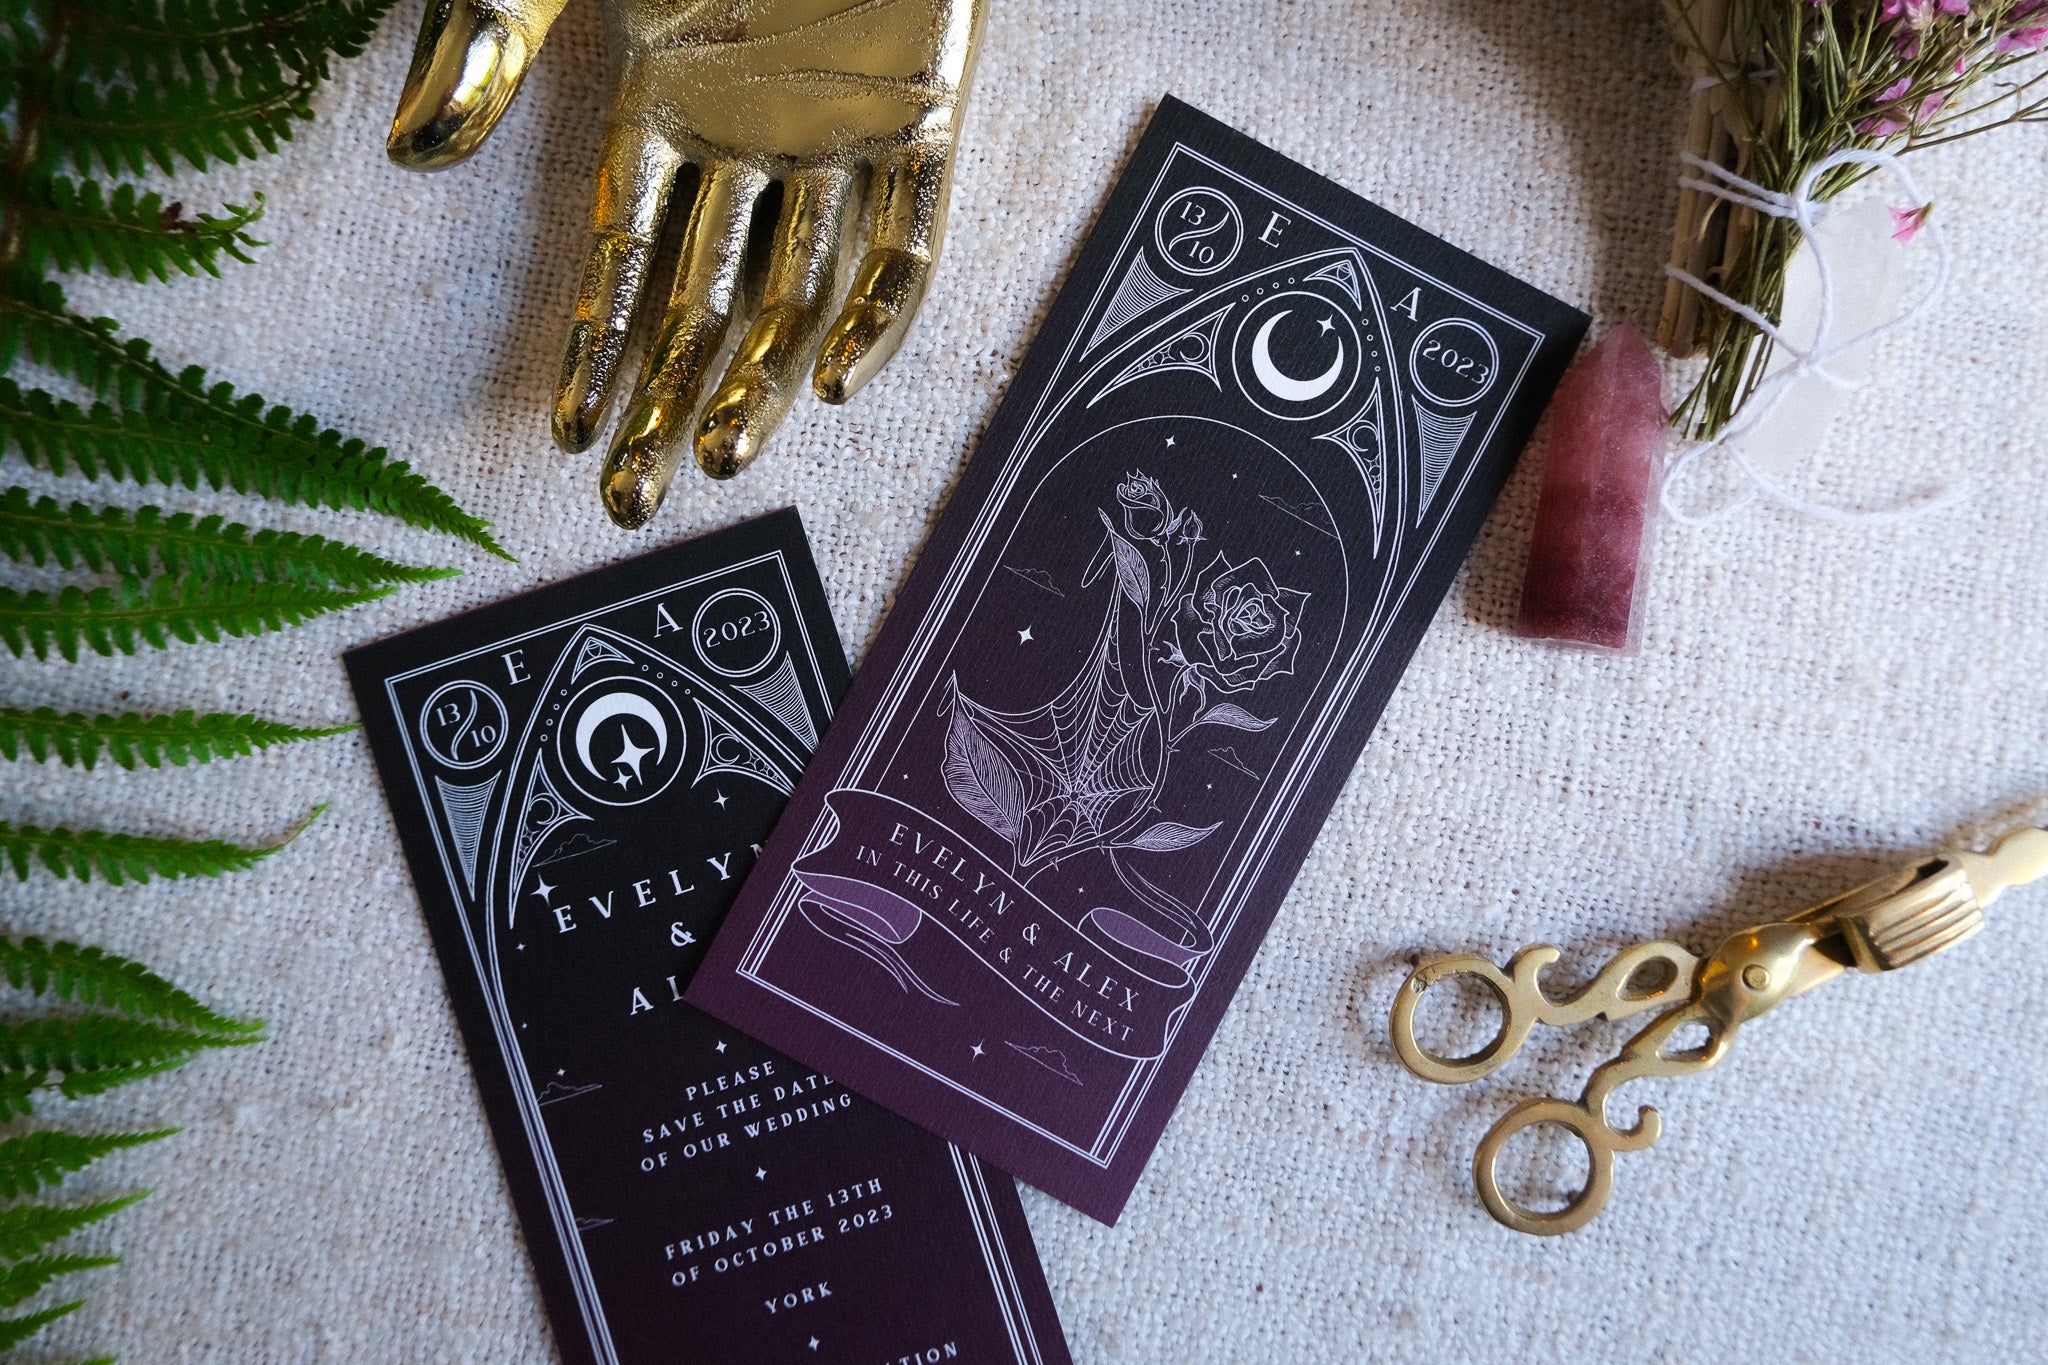 'In This Life & The Next' Black Rose Tarot Save The Date Card